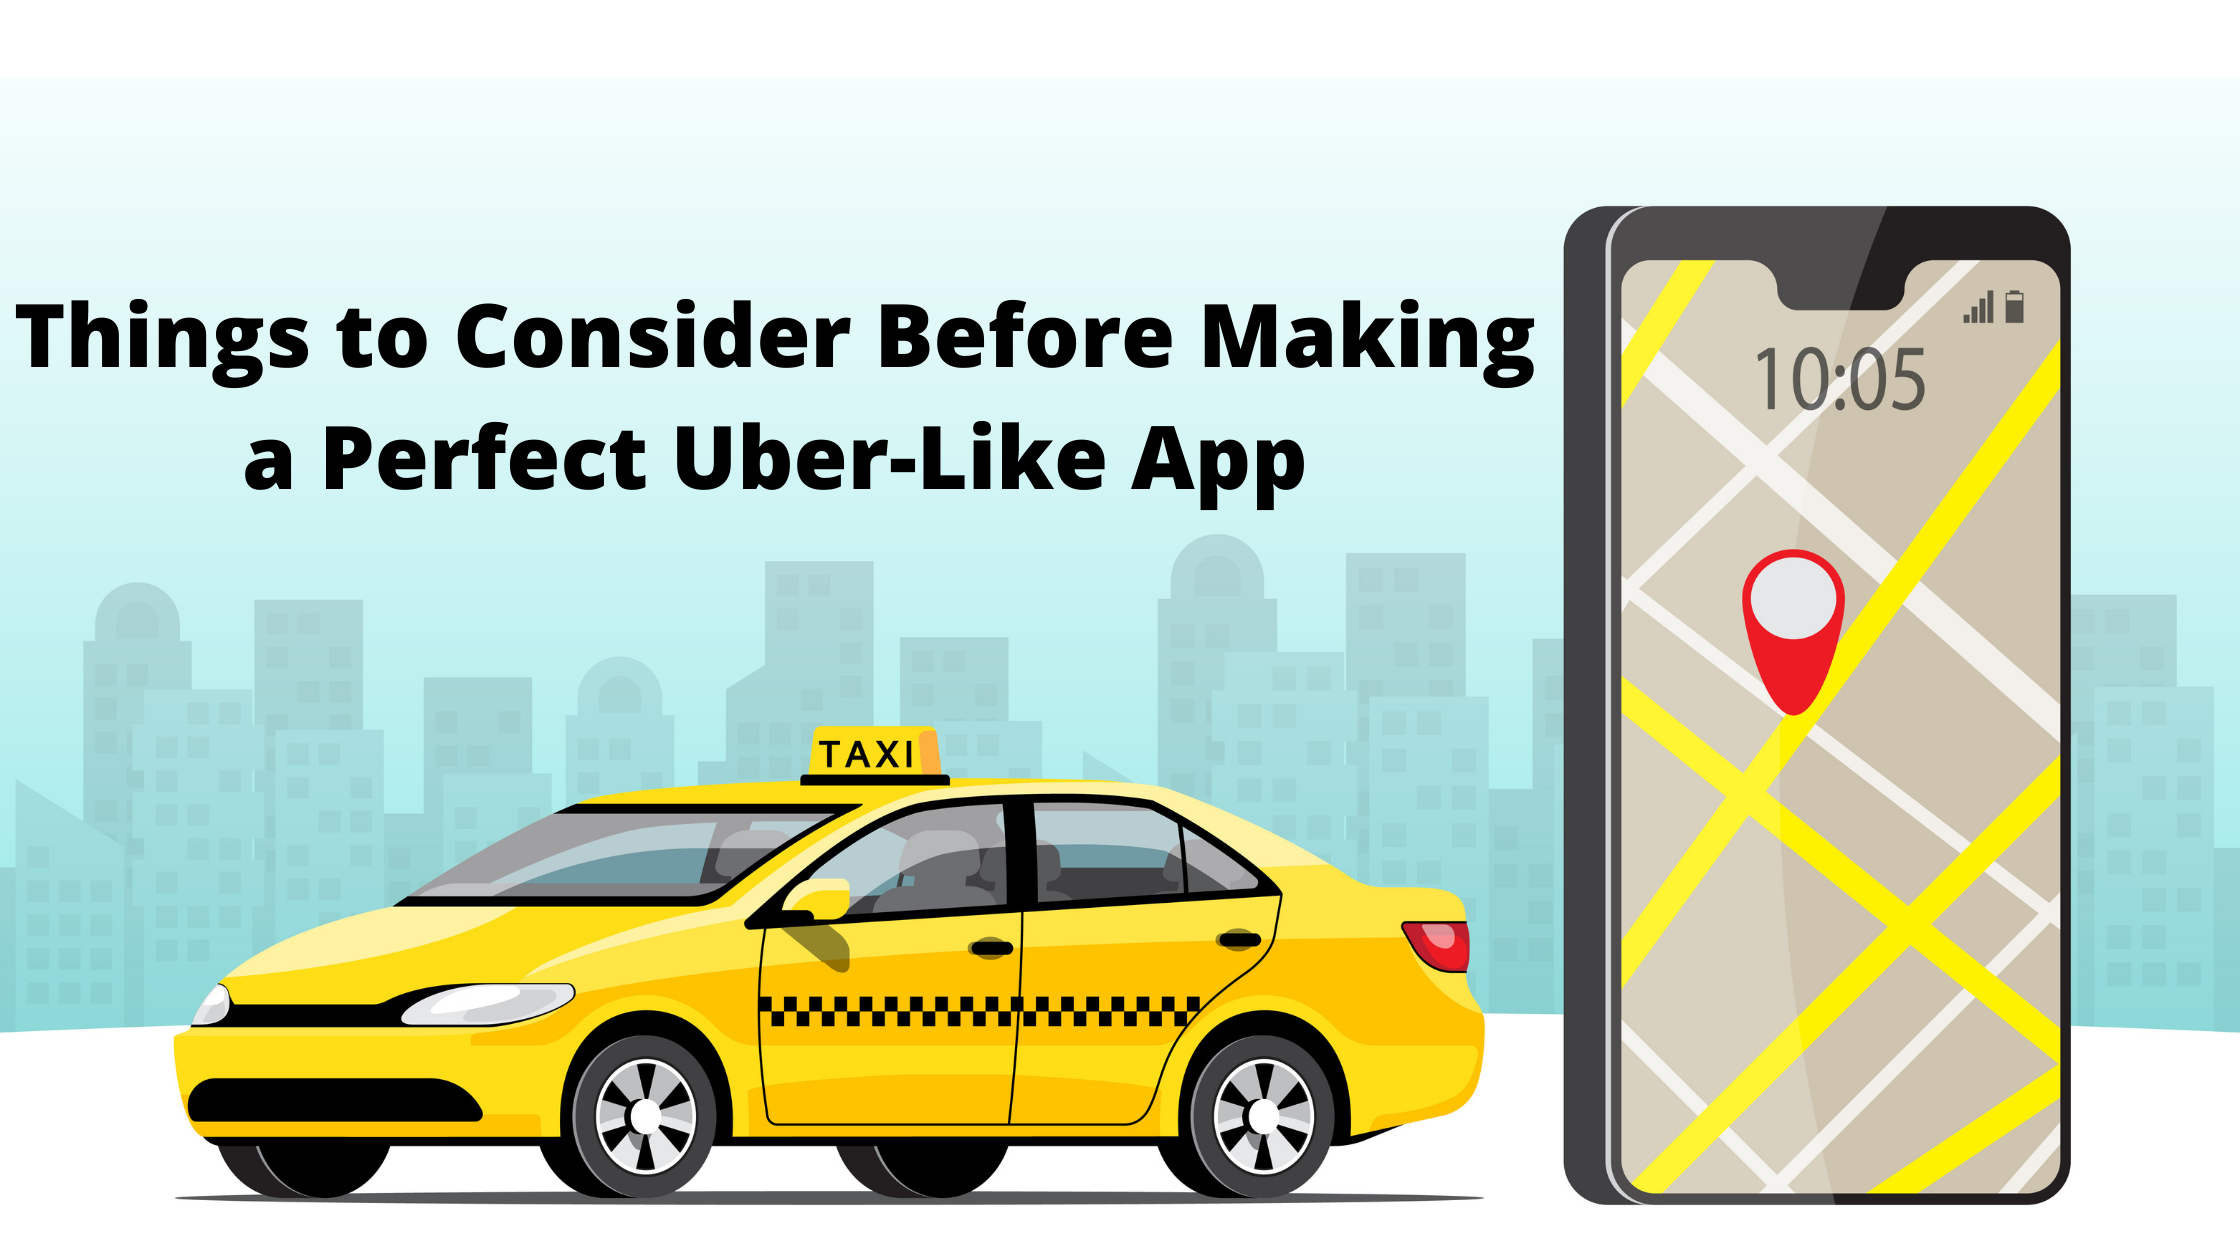 Things to Consider Before Making a Perfect Uber-Like App